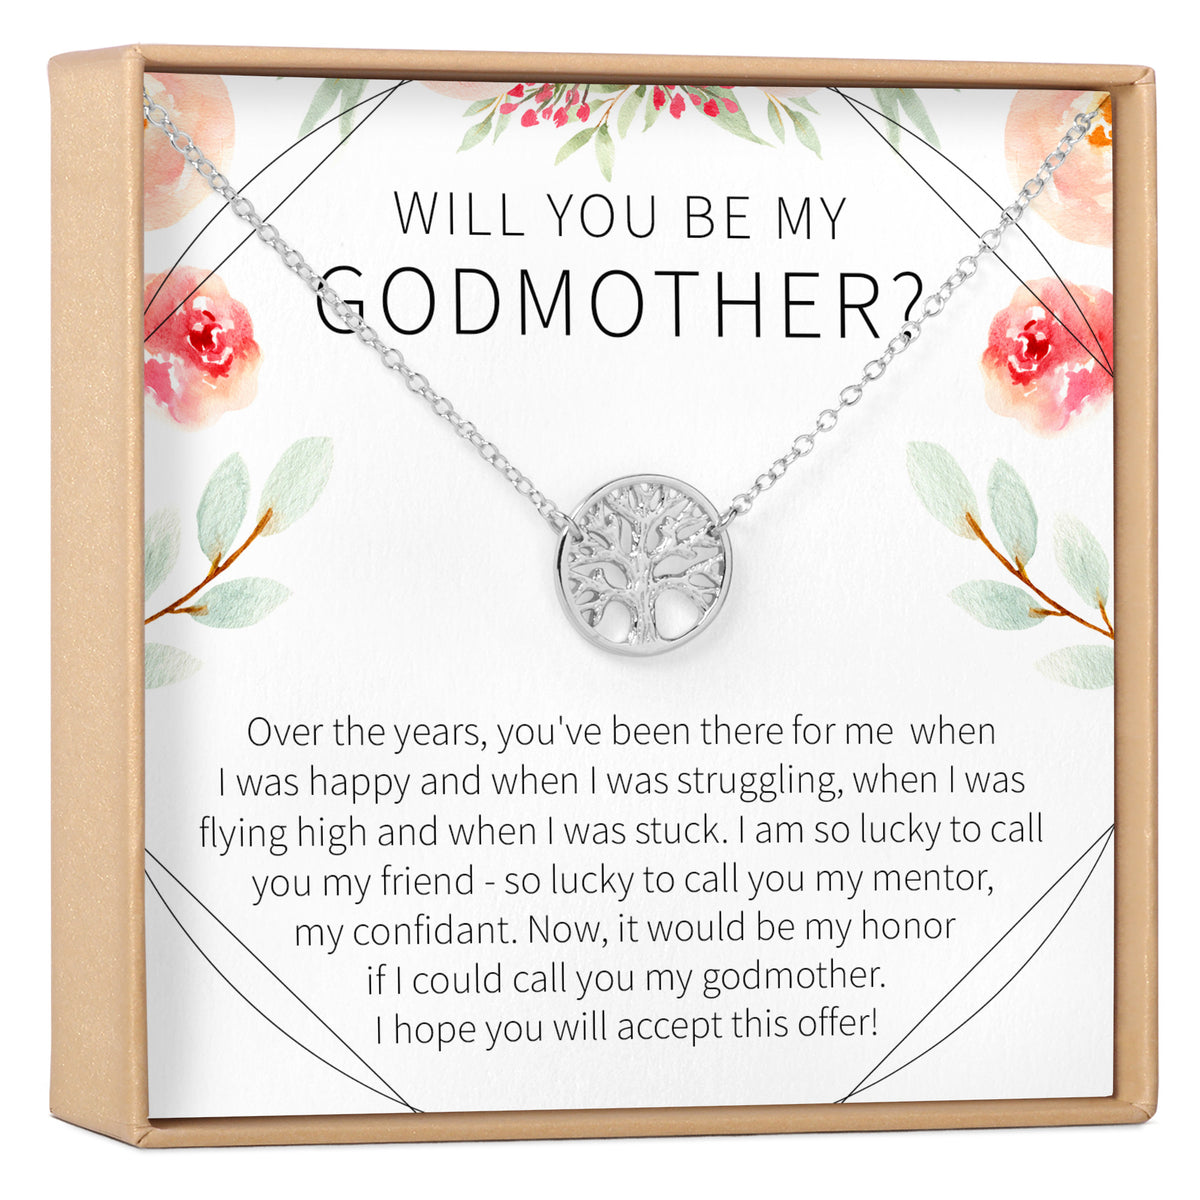 Godmother Necklace